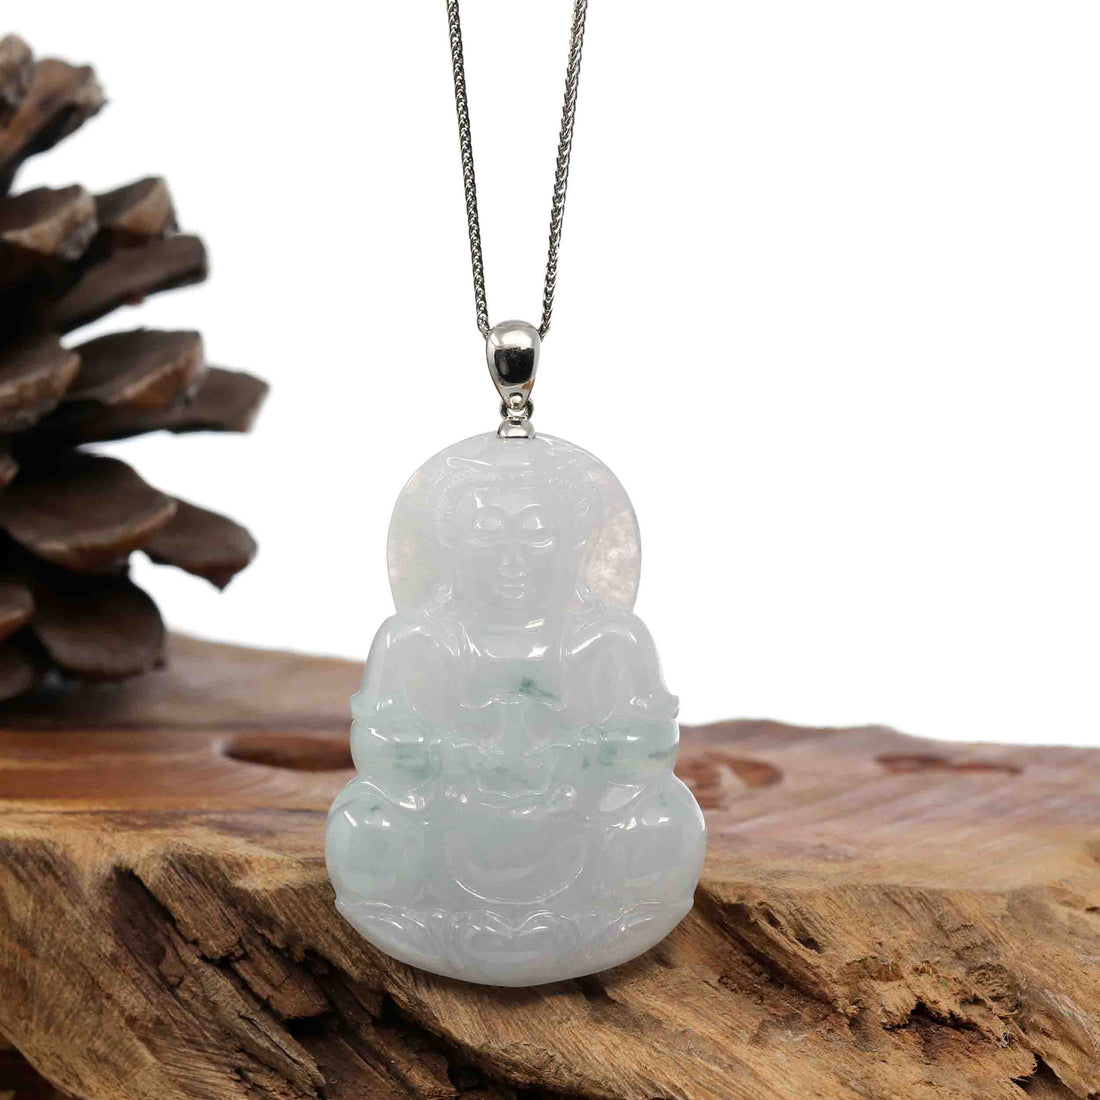 Baikalla Jewelry Jade Guanyin Pendant Necklace "Goddess of Compassion" Sterling Silver Genuine Burmese Jadeite Jade Guanyin Necklace